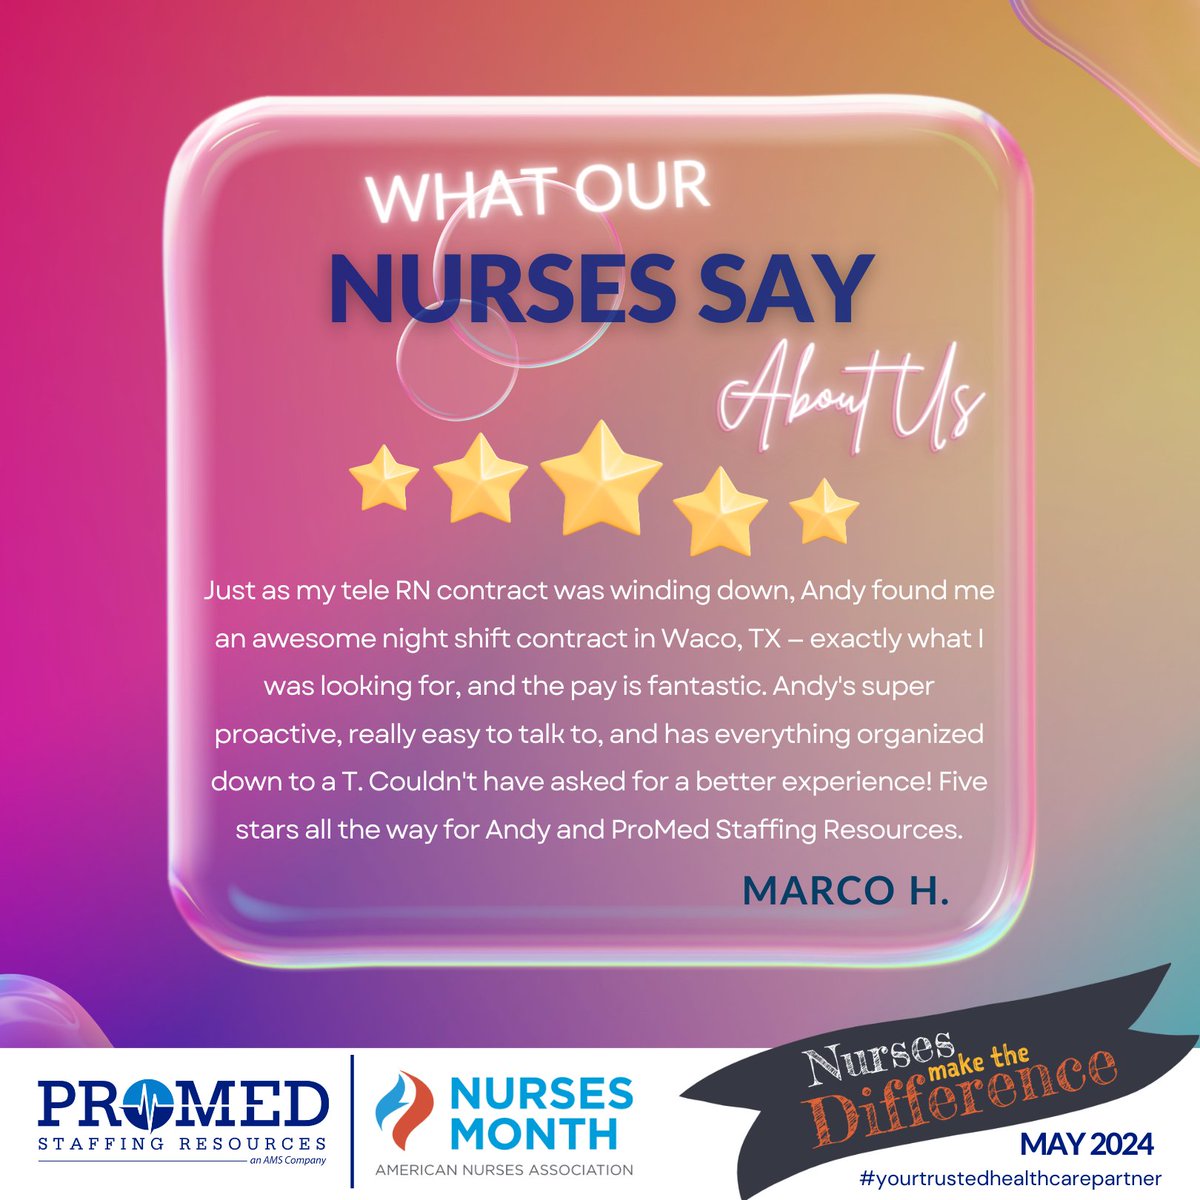 Thank you so much for your incredible #review, Marco! We're thrilled to hear about your positive #experience with Andy. Looking forward to continuing to support your #career. 

#googlereview #clientsatisfaction #weareheretohelp #bestreviews #greatplacetowork #GPTW #promedsr